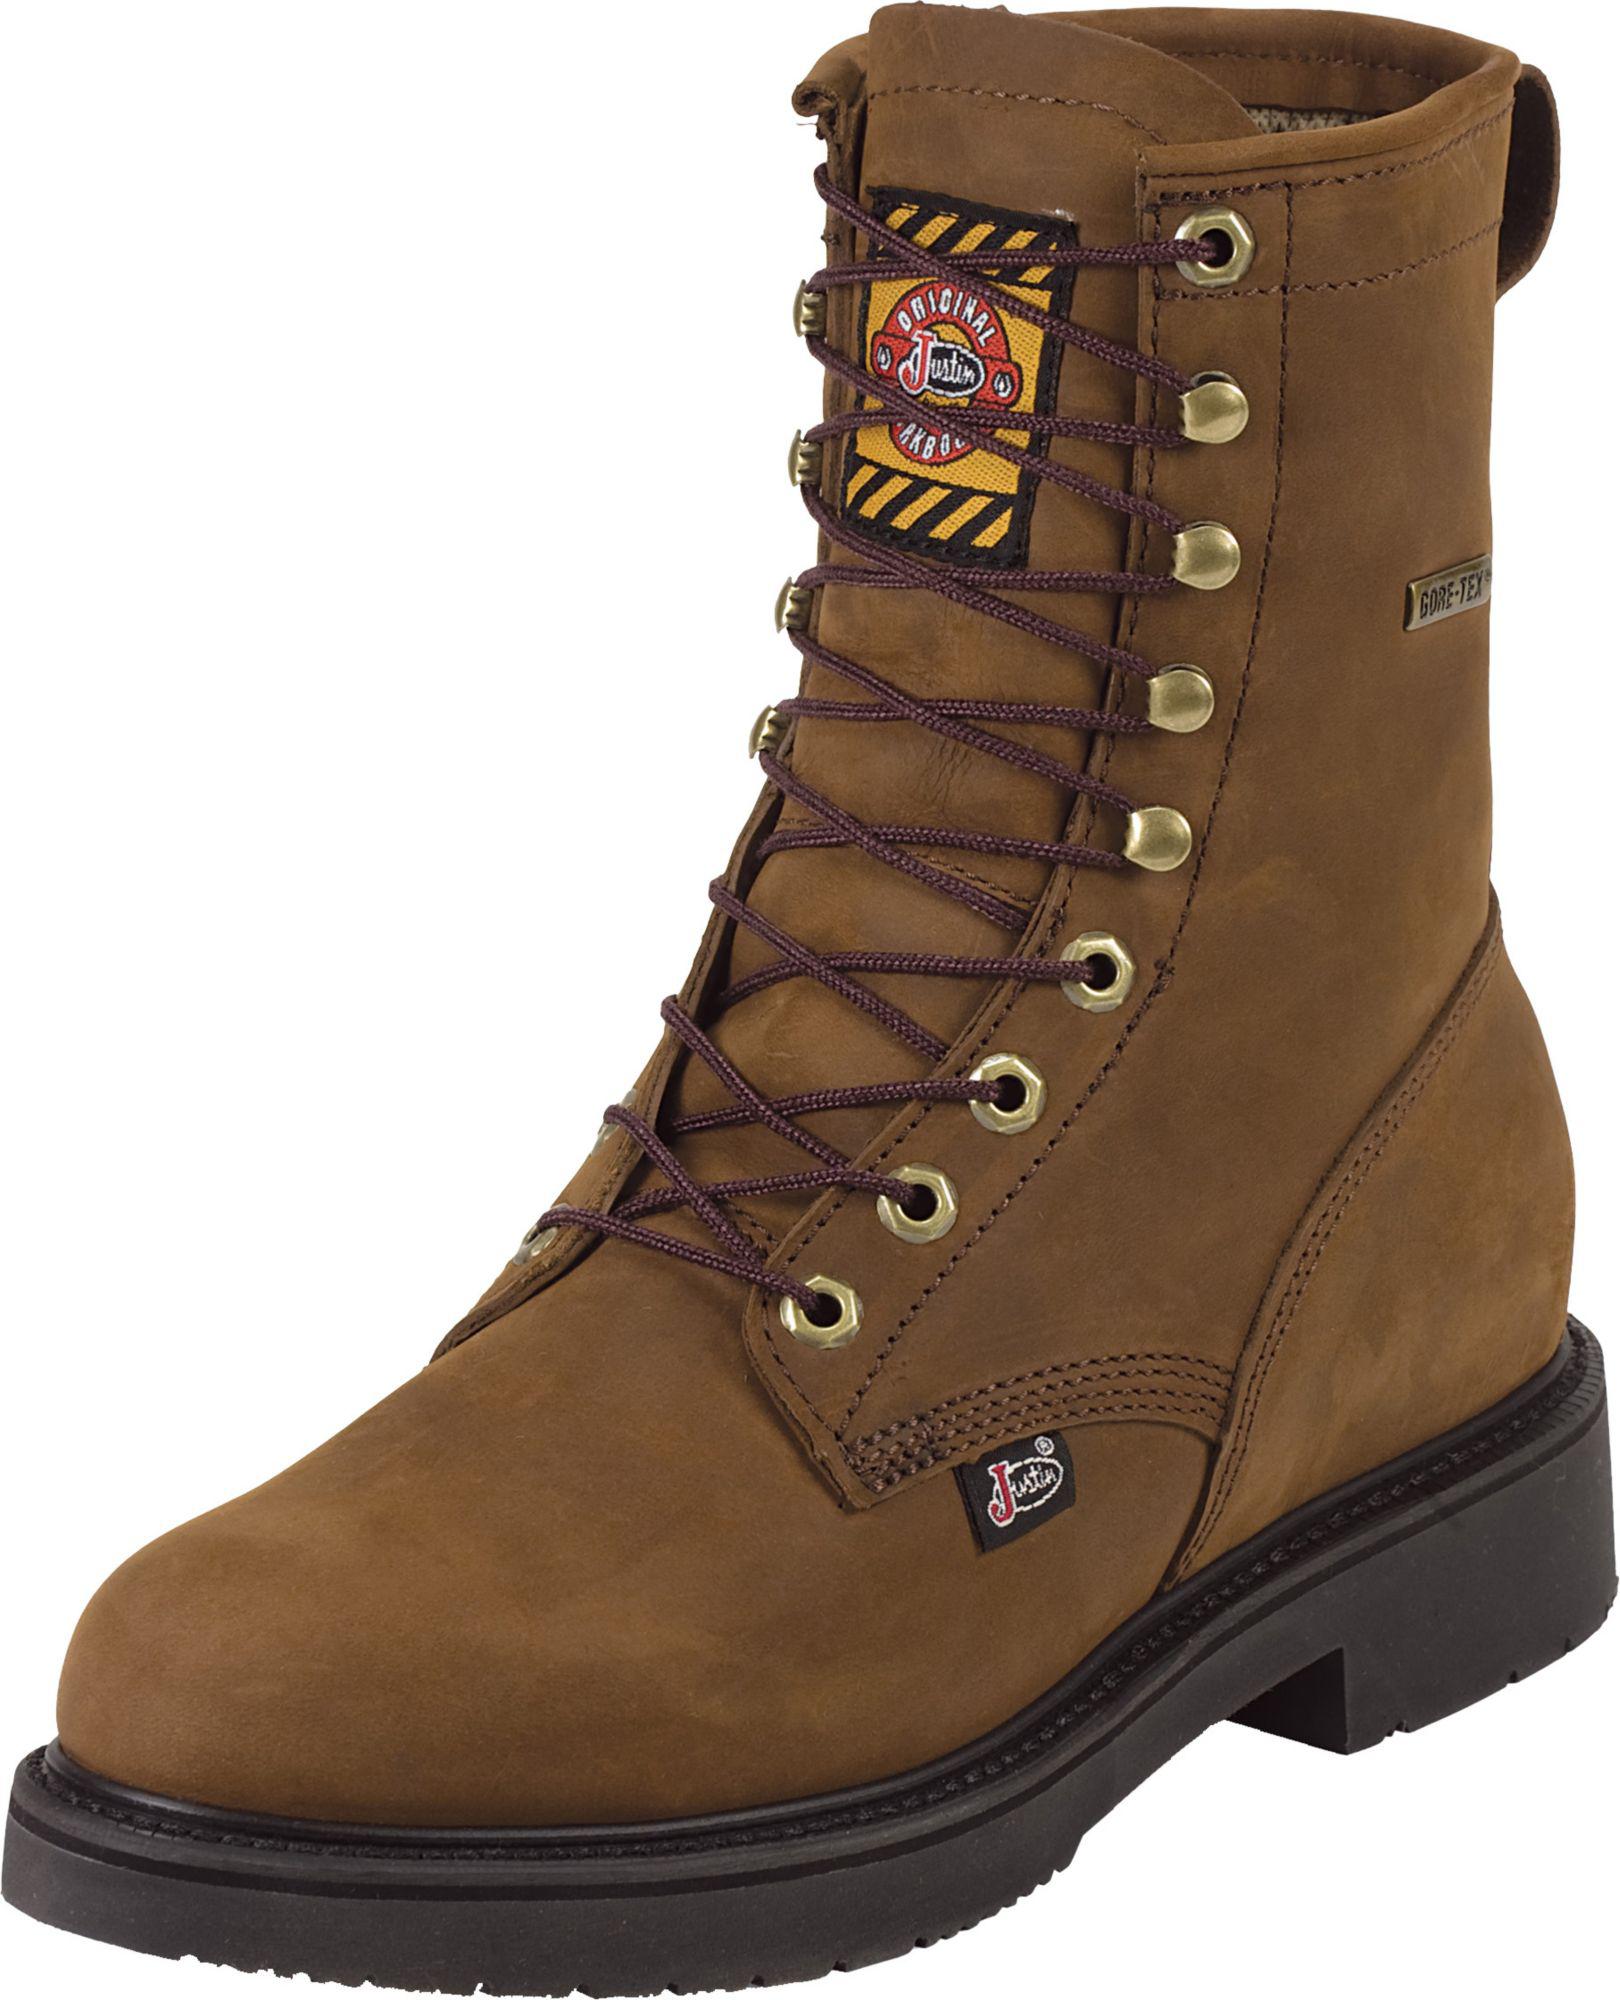 mens justin work boots